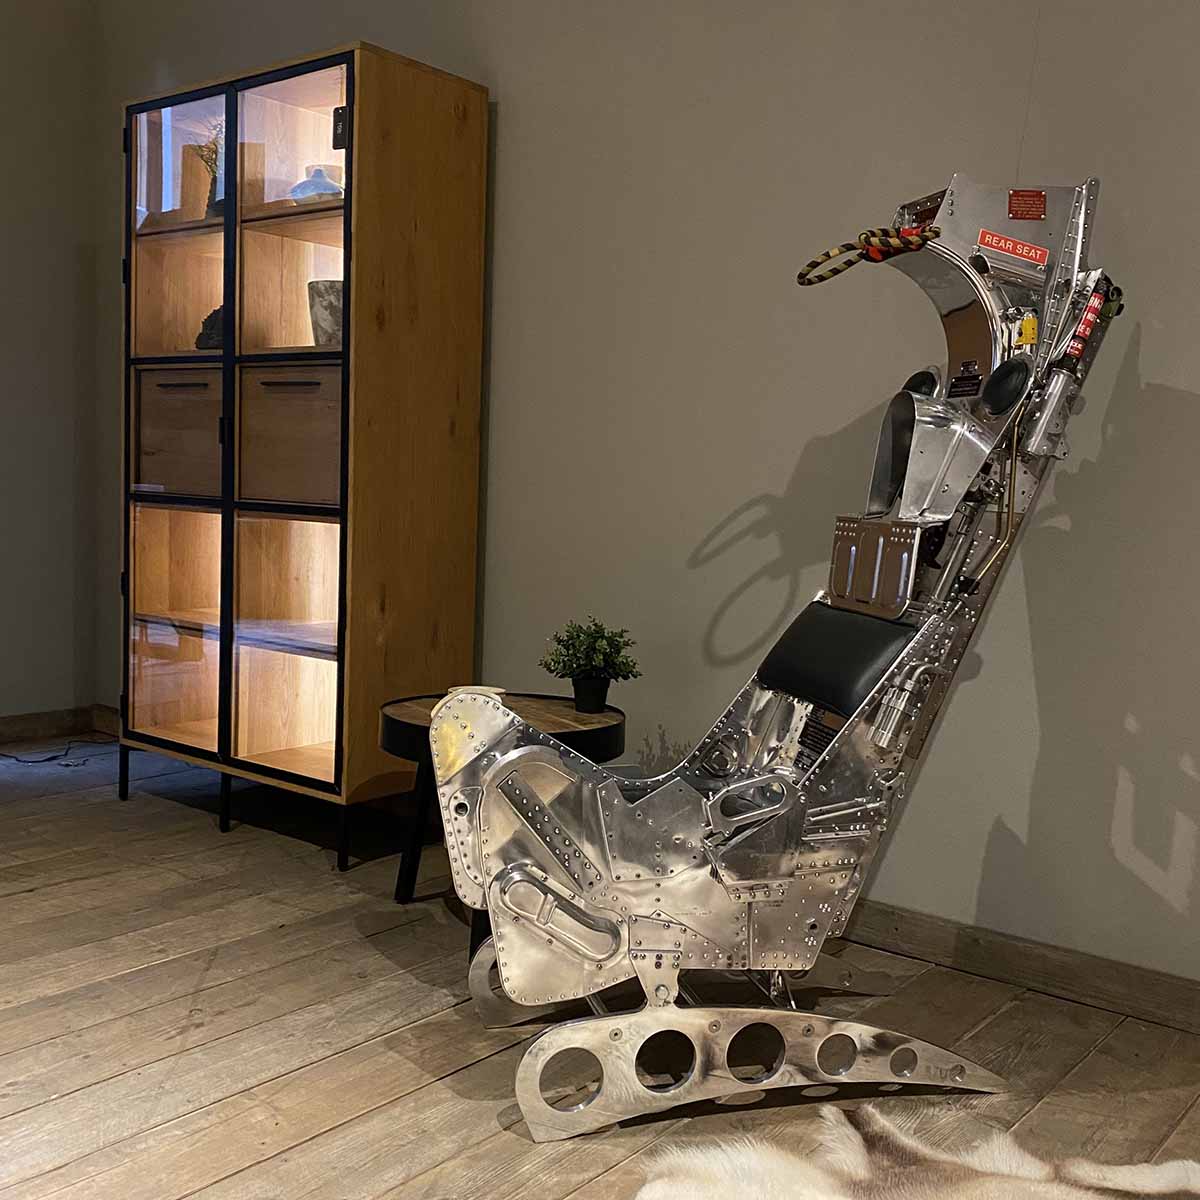 Mirror polished Martin-Baker Mk6 ejection seat in a living room.